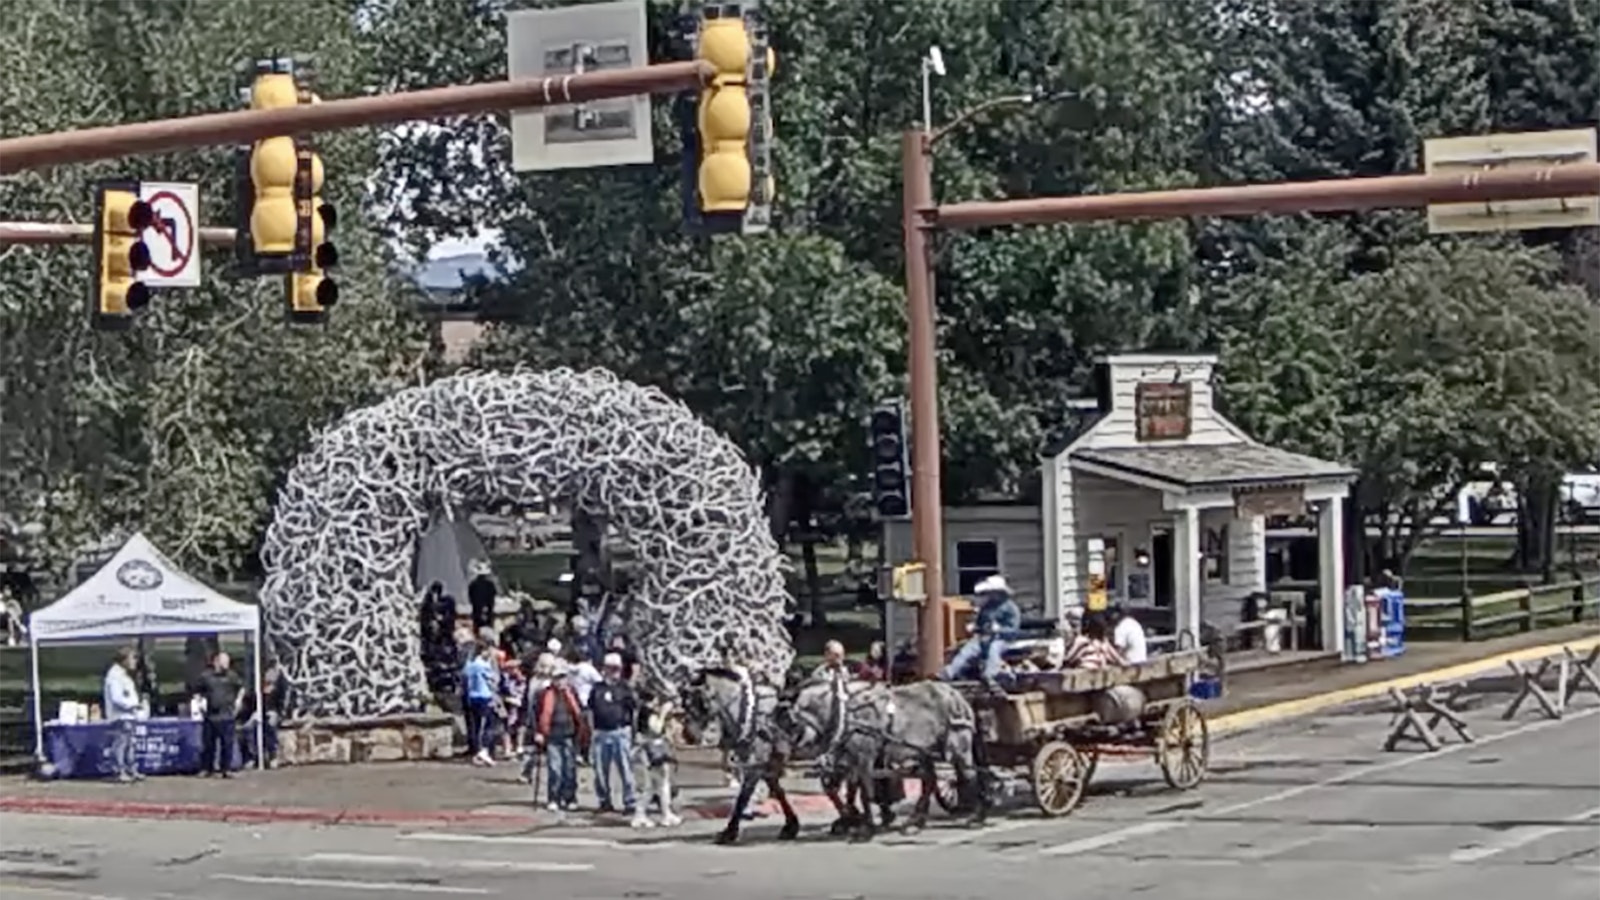 A hay wagon makes its way through downtown Jackson a week after a runaway team of horses crashed an unoccupied stagecoach into a light pole at the town's busiest intersection.